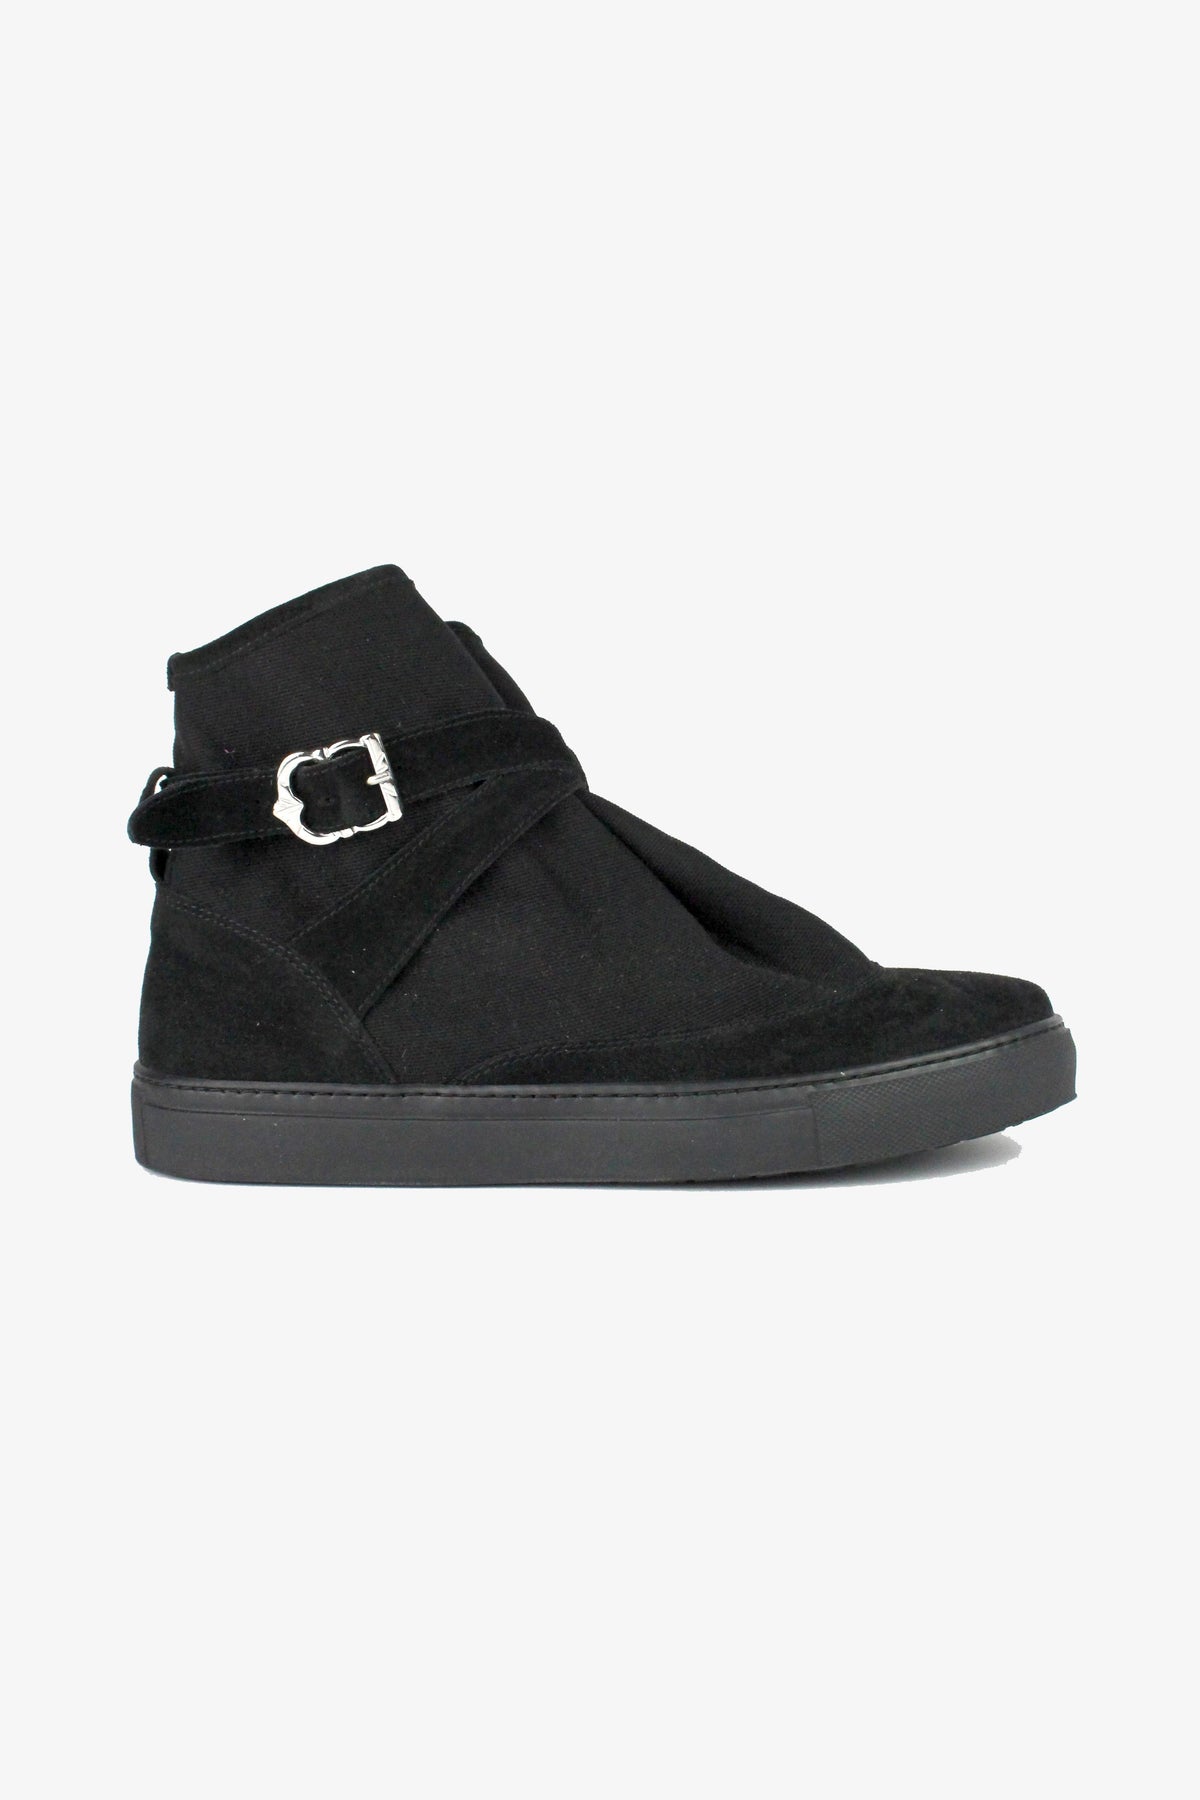 HIGHPAD SNEAKER BLACK CANVAS W/ SUEDE-shoes-A Child Of The Jago